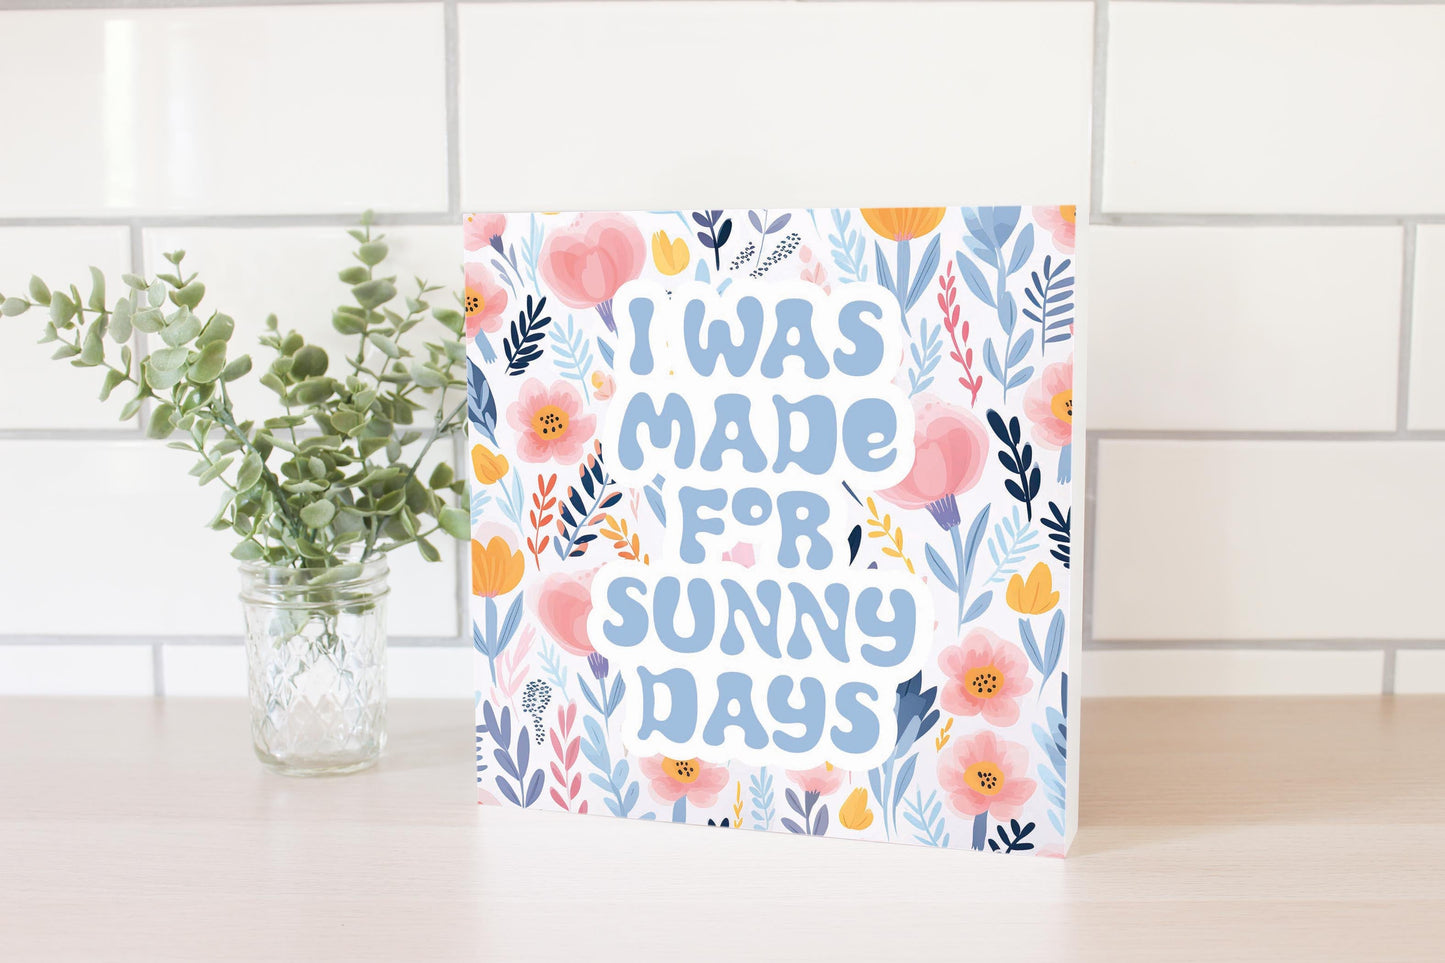 Spring Pastel I was Made For Sunny Days | 10x10